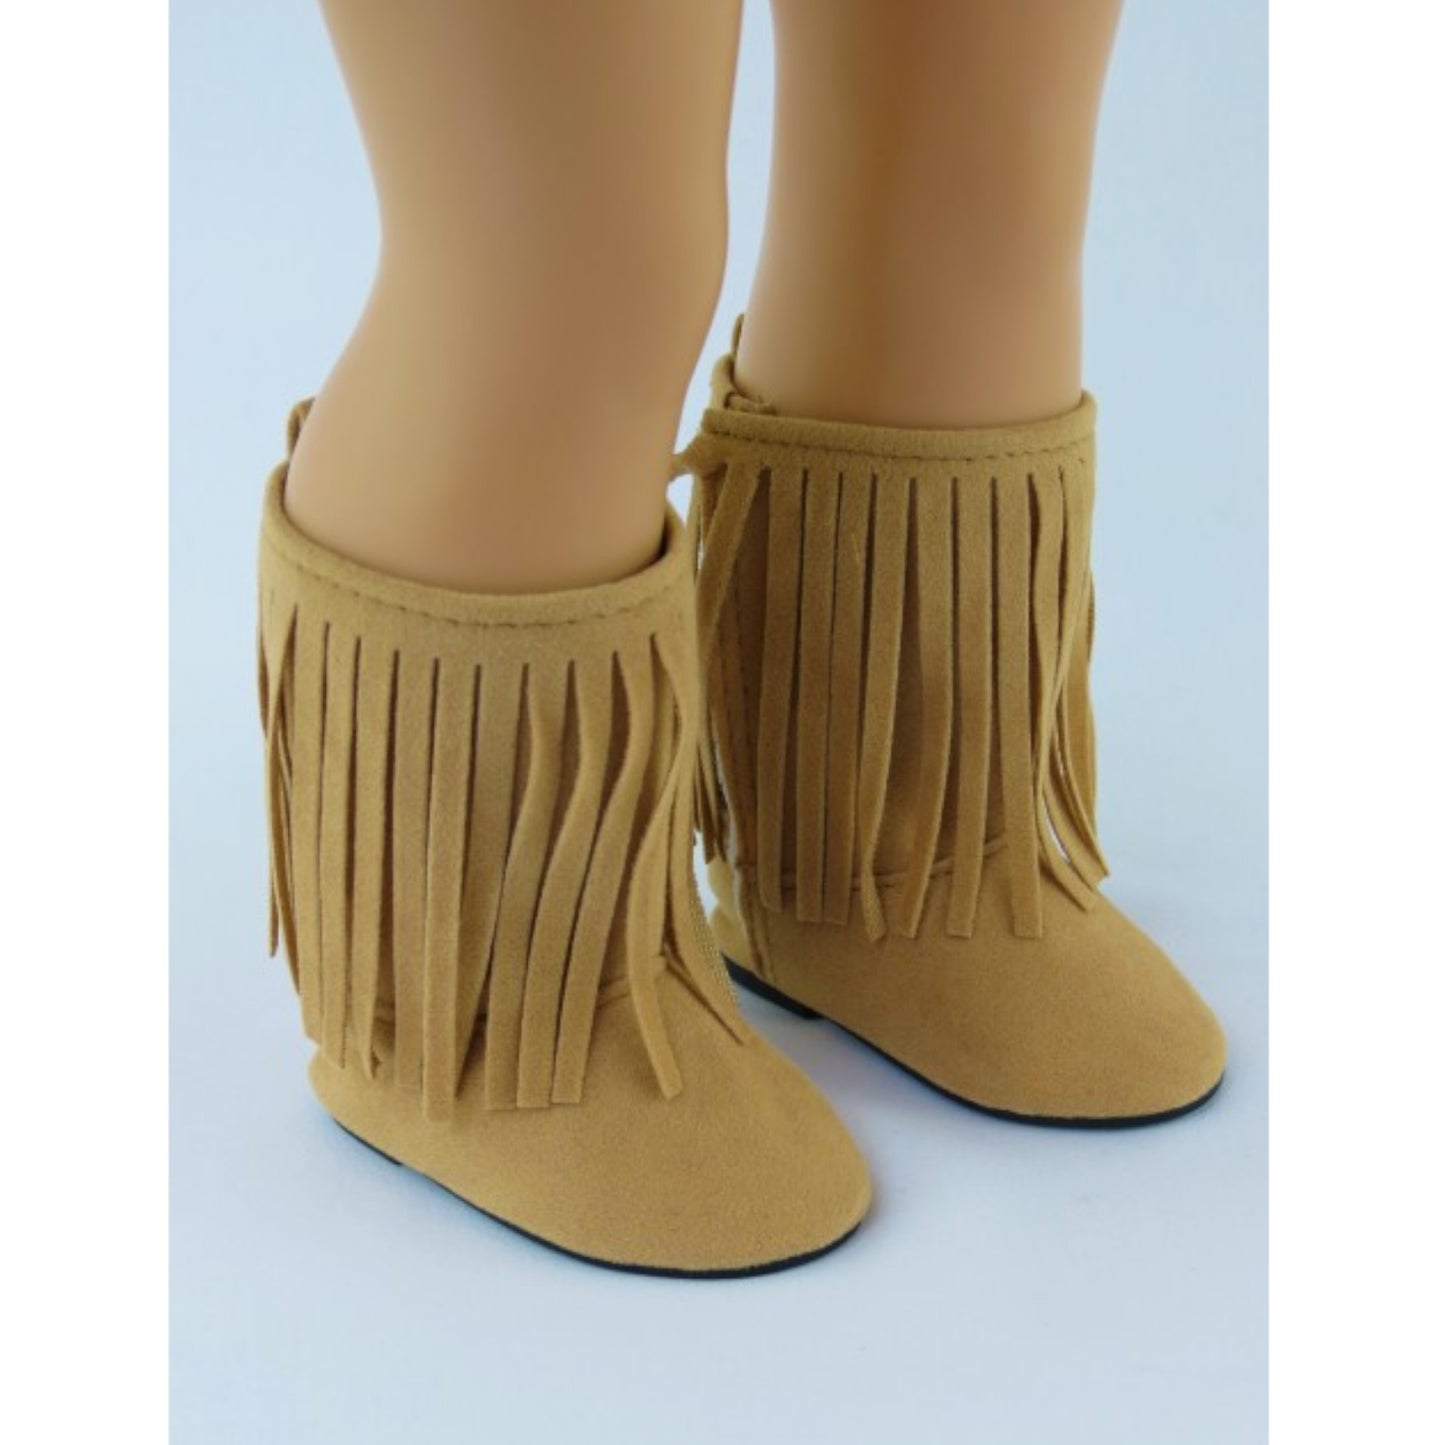 Tan Fringe Boots for 18-inch dolls with Doll